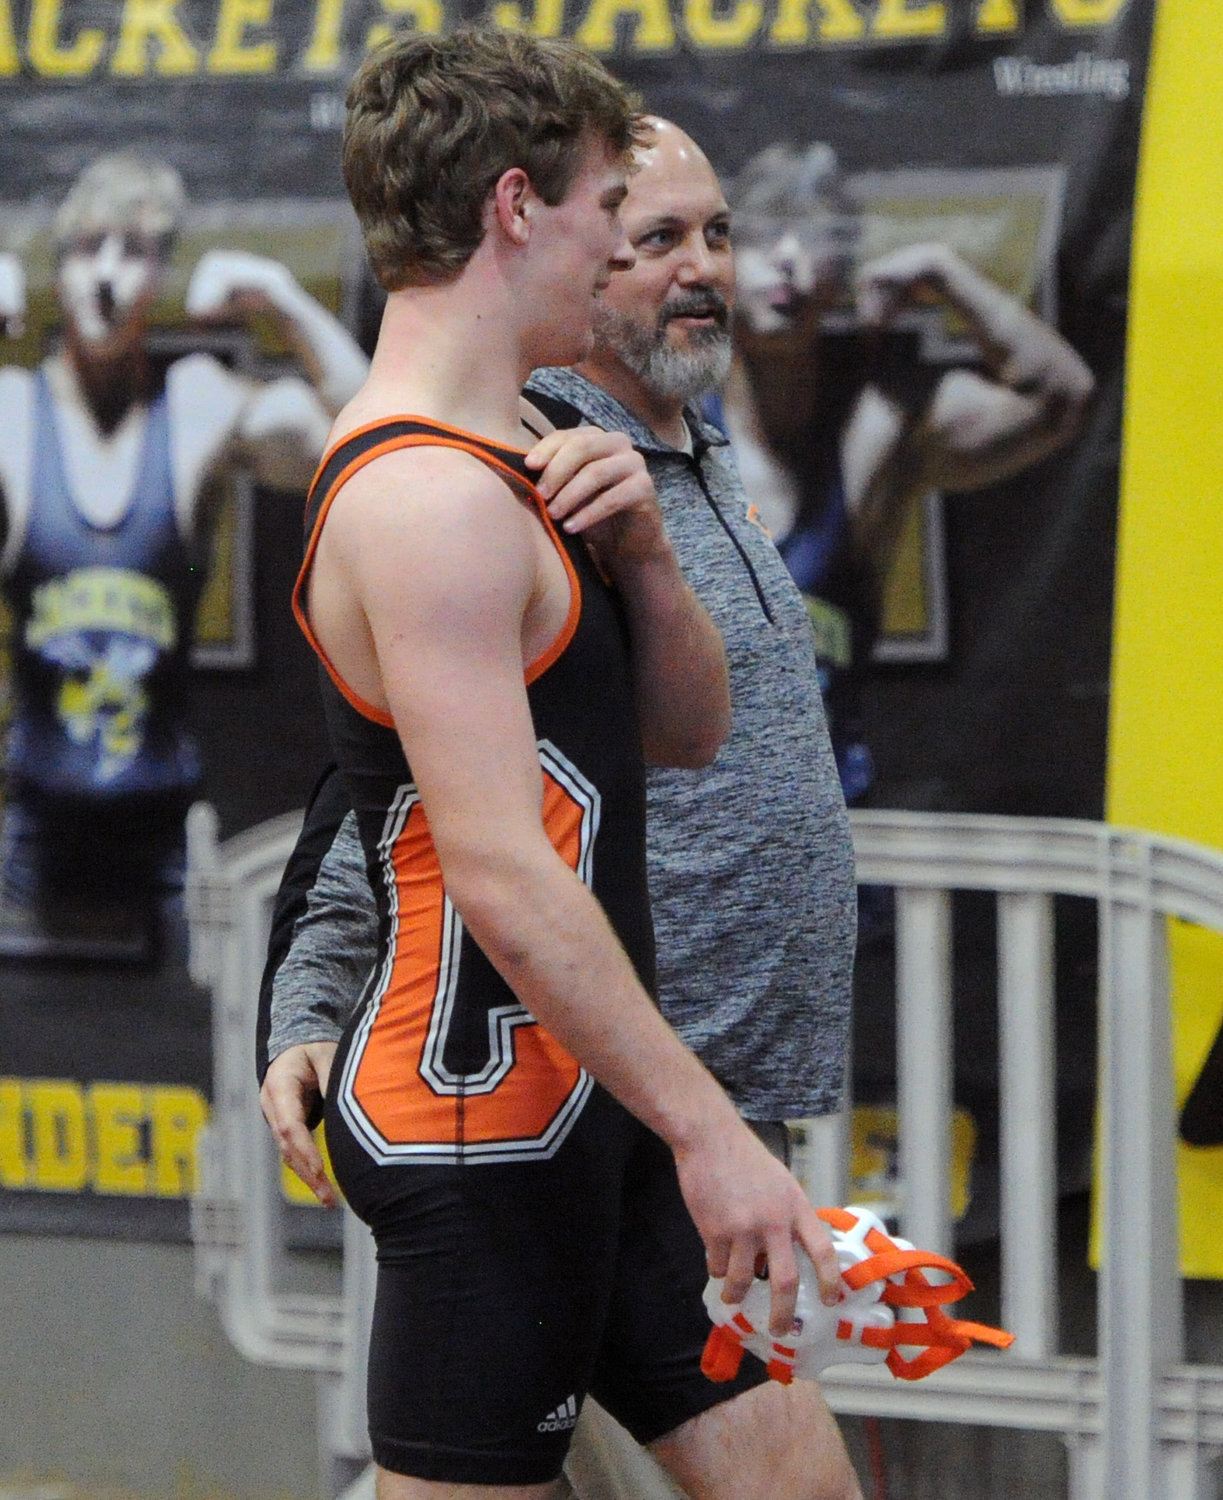 Hayden Dowell regroups with Champion coach Andy Giel after his first match in the 152-pound Class A bracket on Thursday.